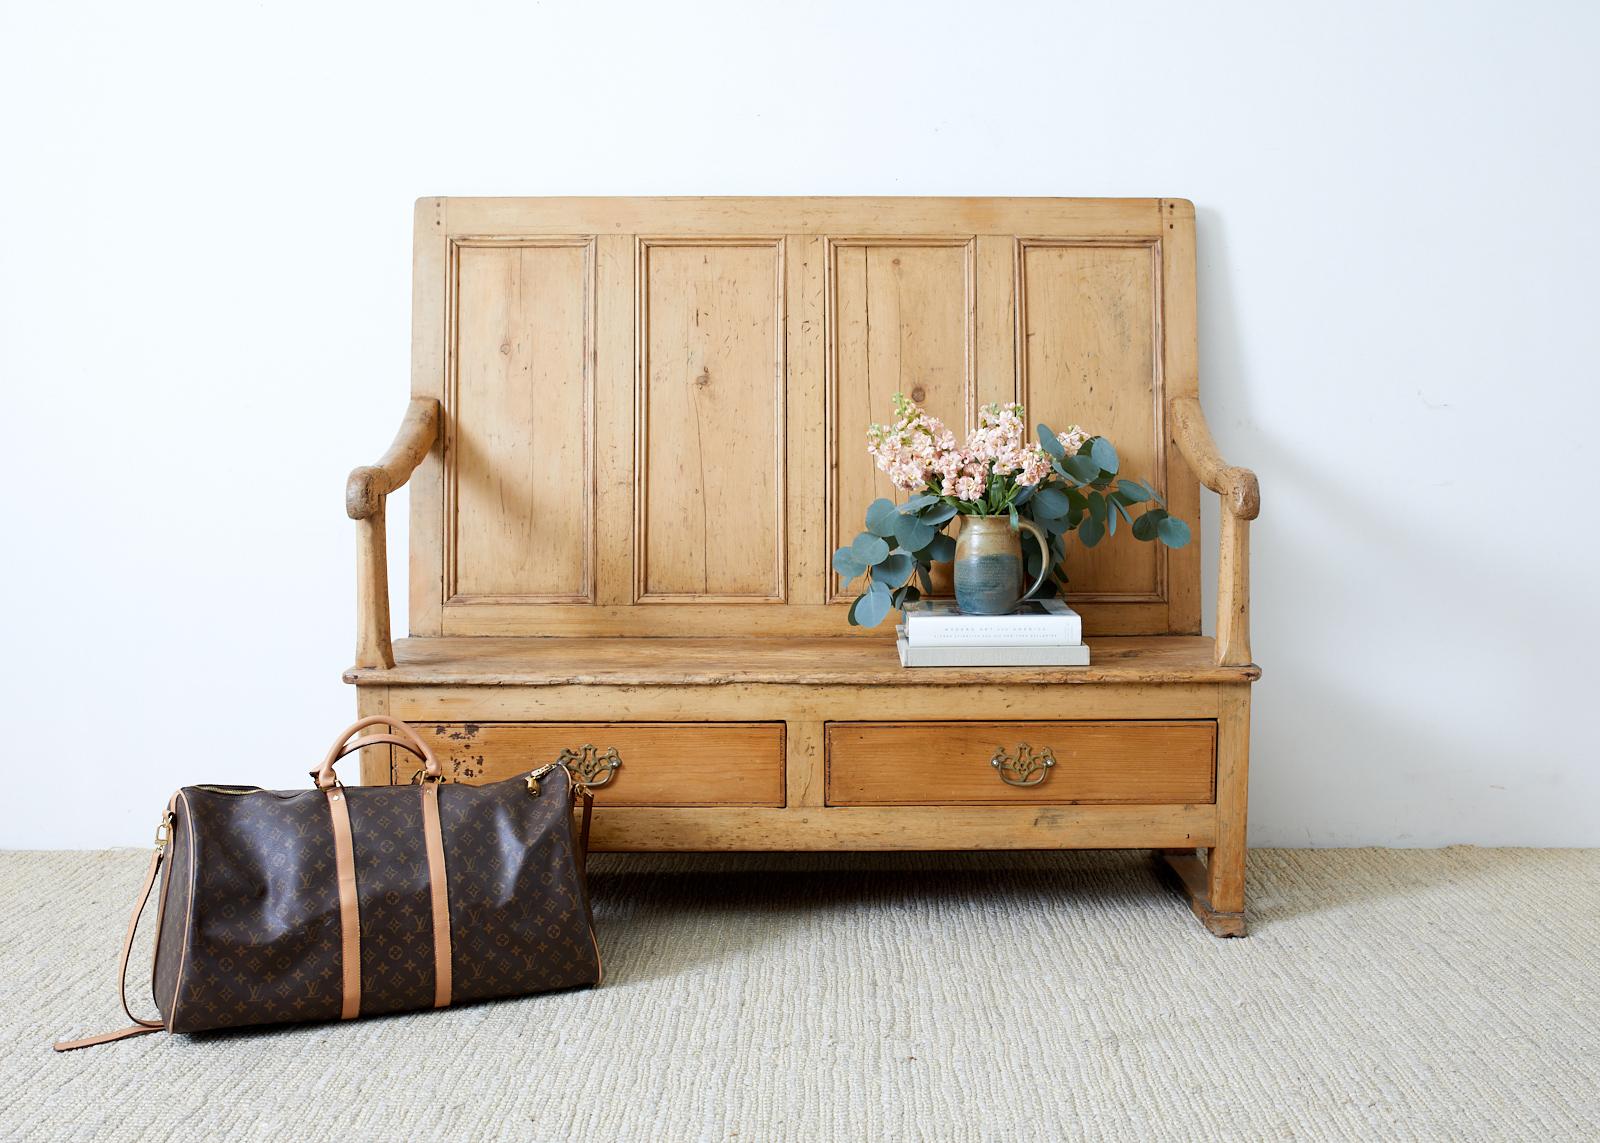 Rustic early 19th century country English hall settle or bench. Constructed from pine with mortise and tenon joinery and wood peg joinery. The thick pine has a beautifully aged patina and soft feel. The straight back is decorated with panels.